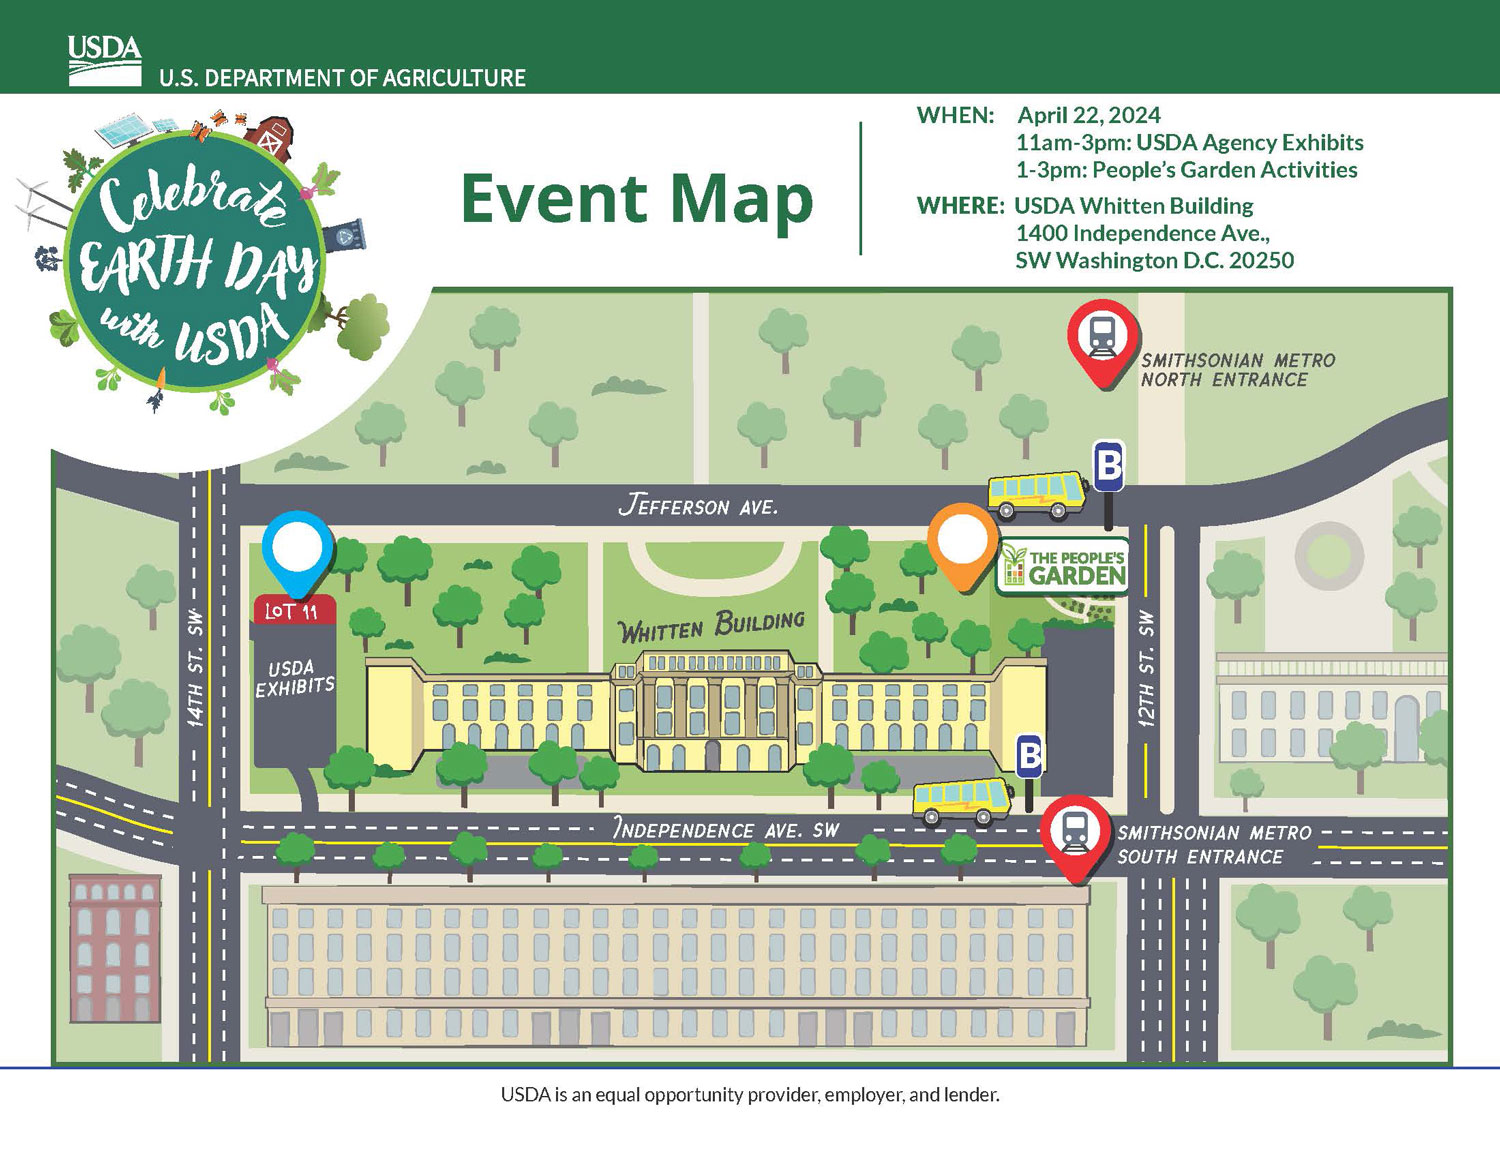 Earth Day event map